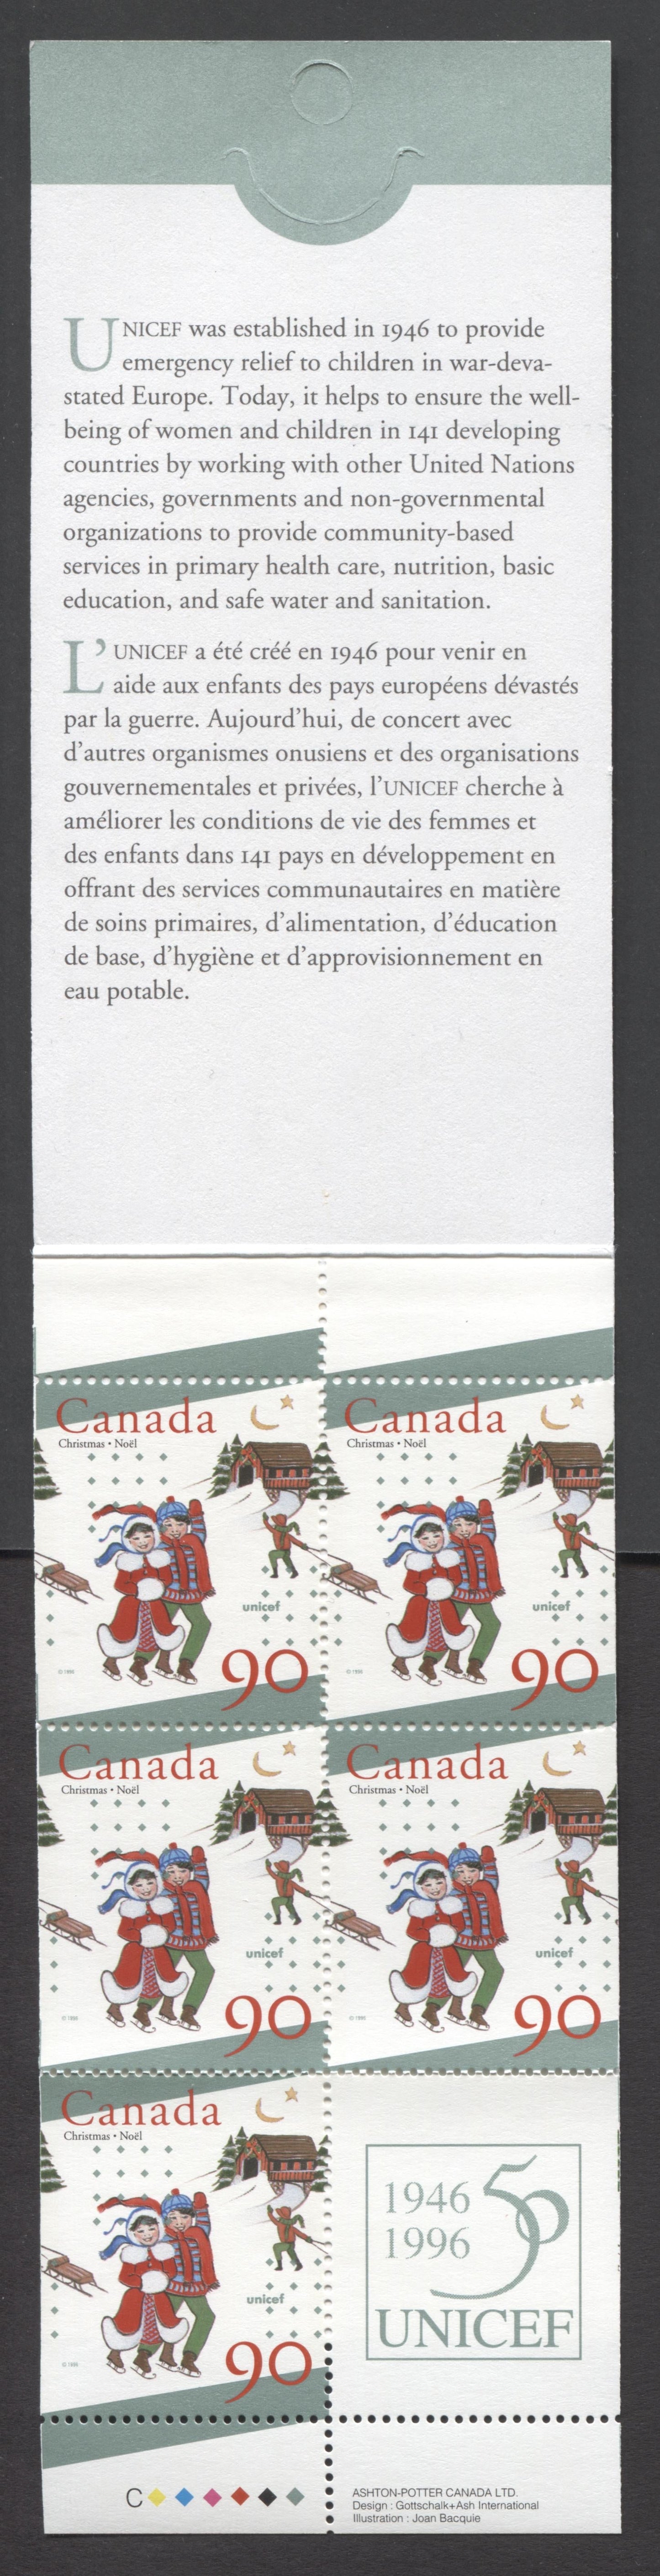 Canada #BK198a-b 1996 Christmas Issue, Complete $4.50 Booklet, Coated Papers Paper, Dead Paper, 4 mm GT-2 Tagging